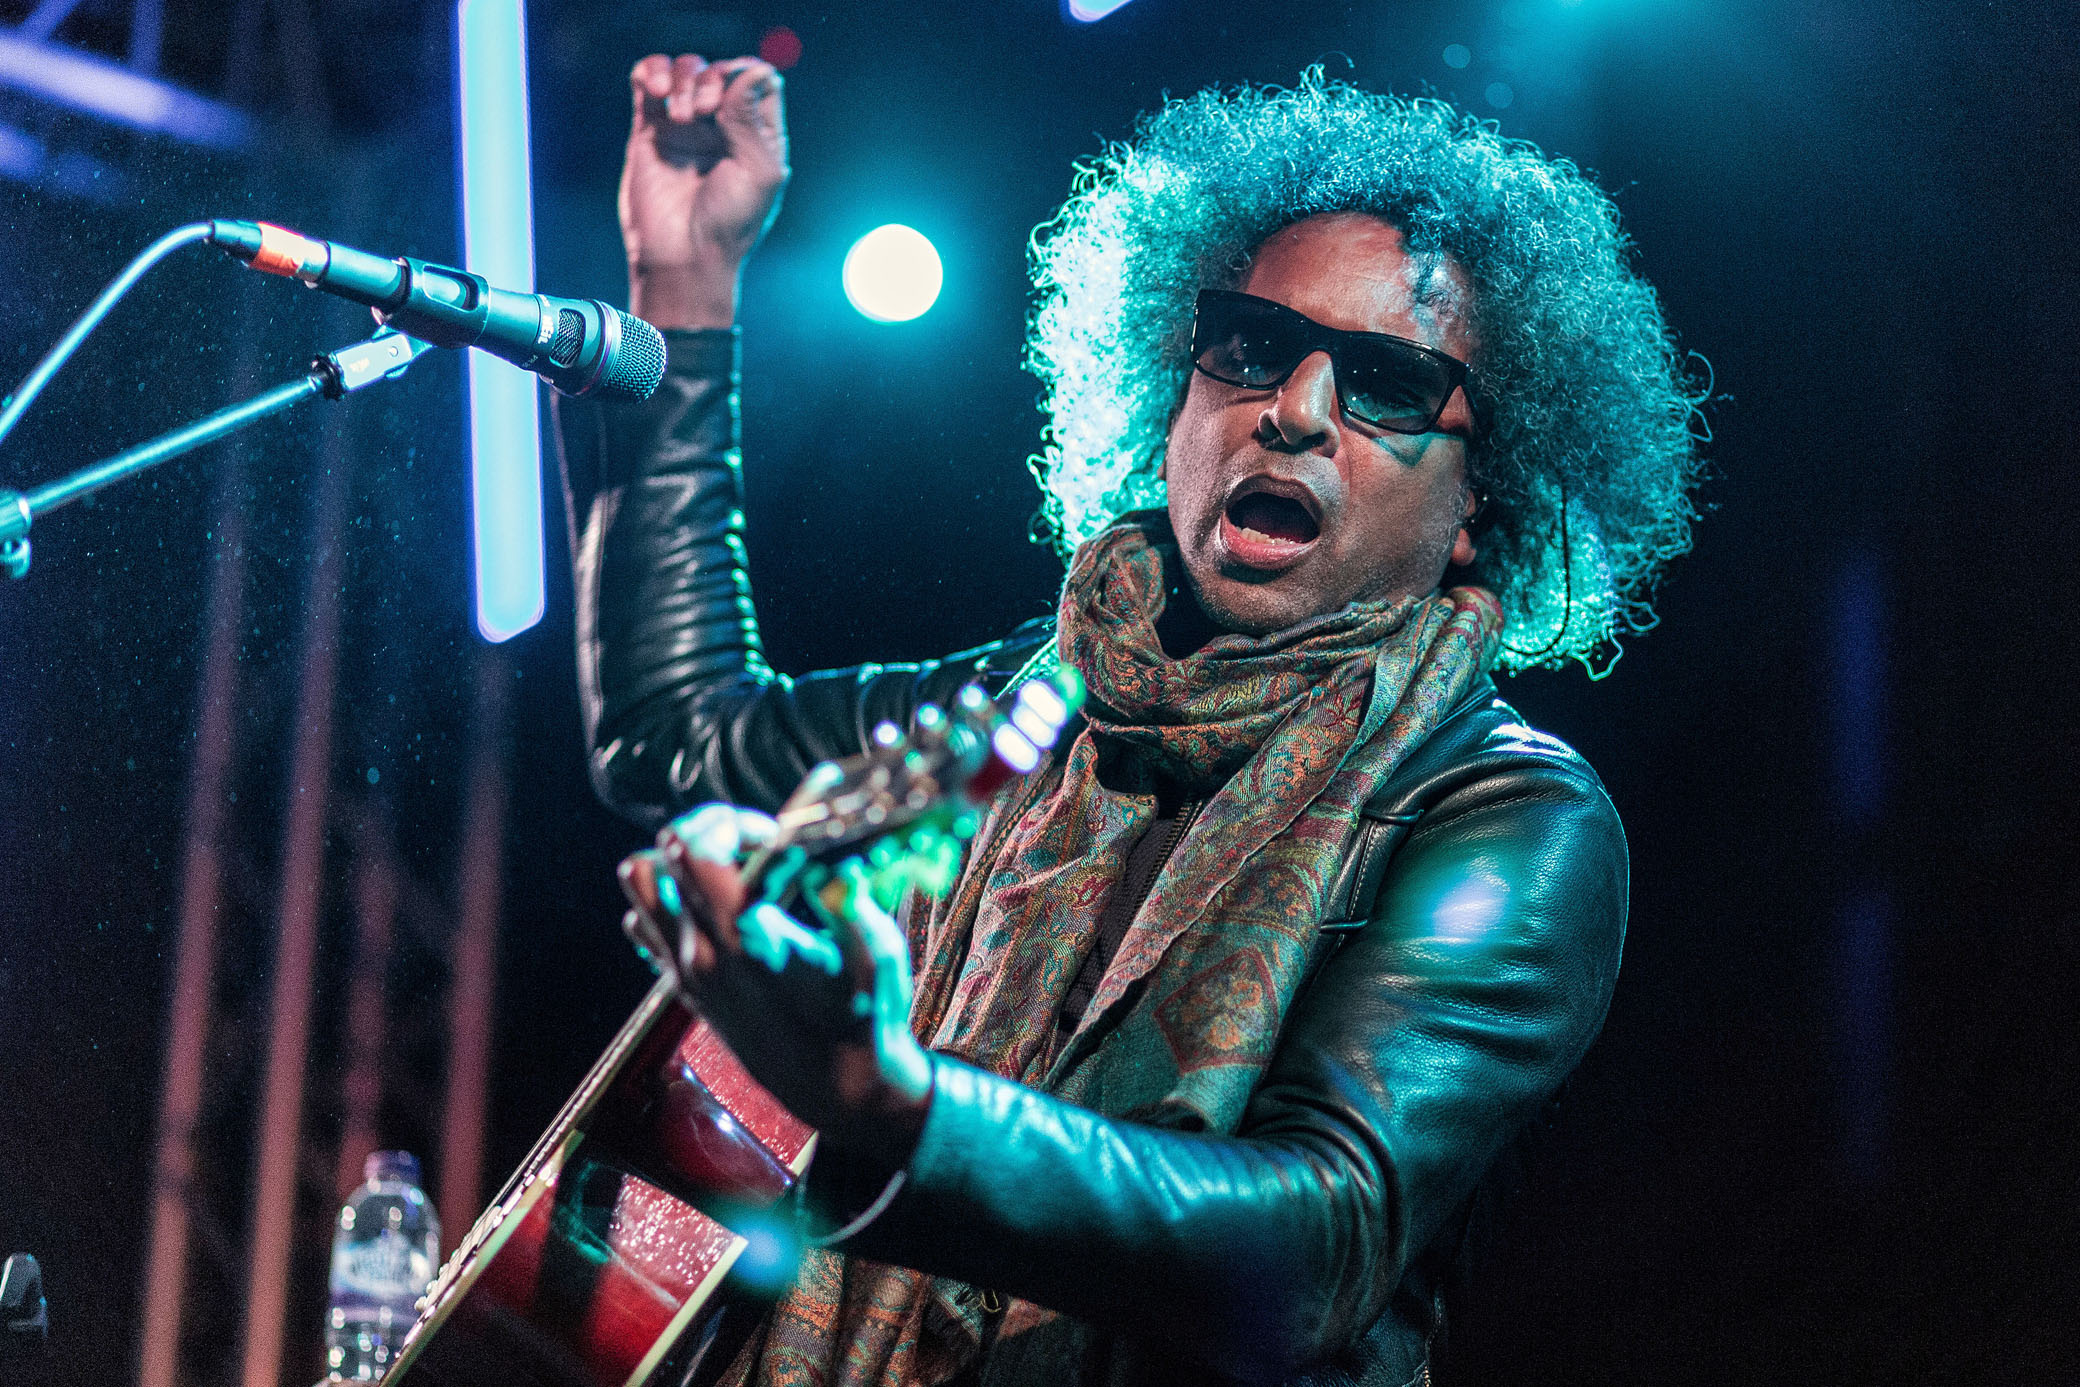 William DuVall Live Review | The Arts Club, Liverpool | reSOUND Online 2080x1390